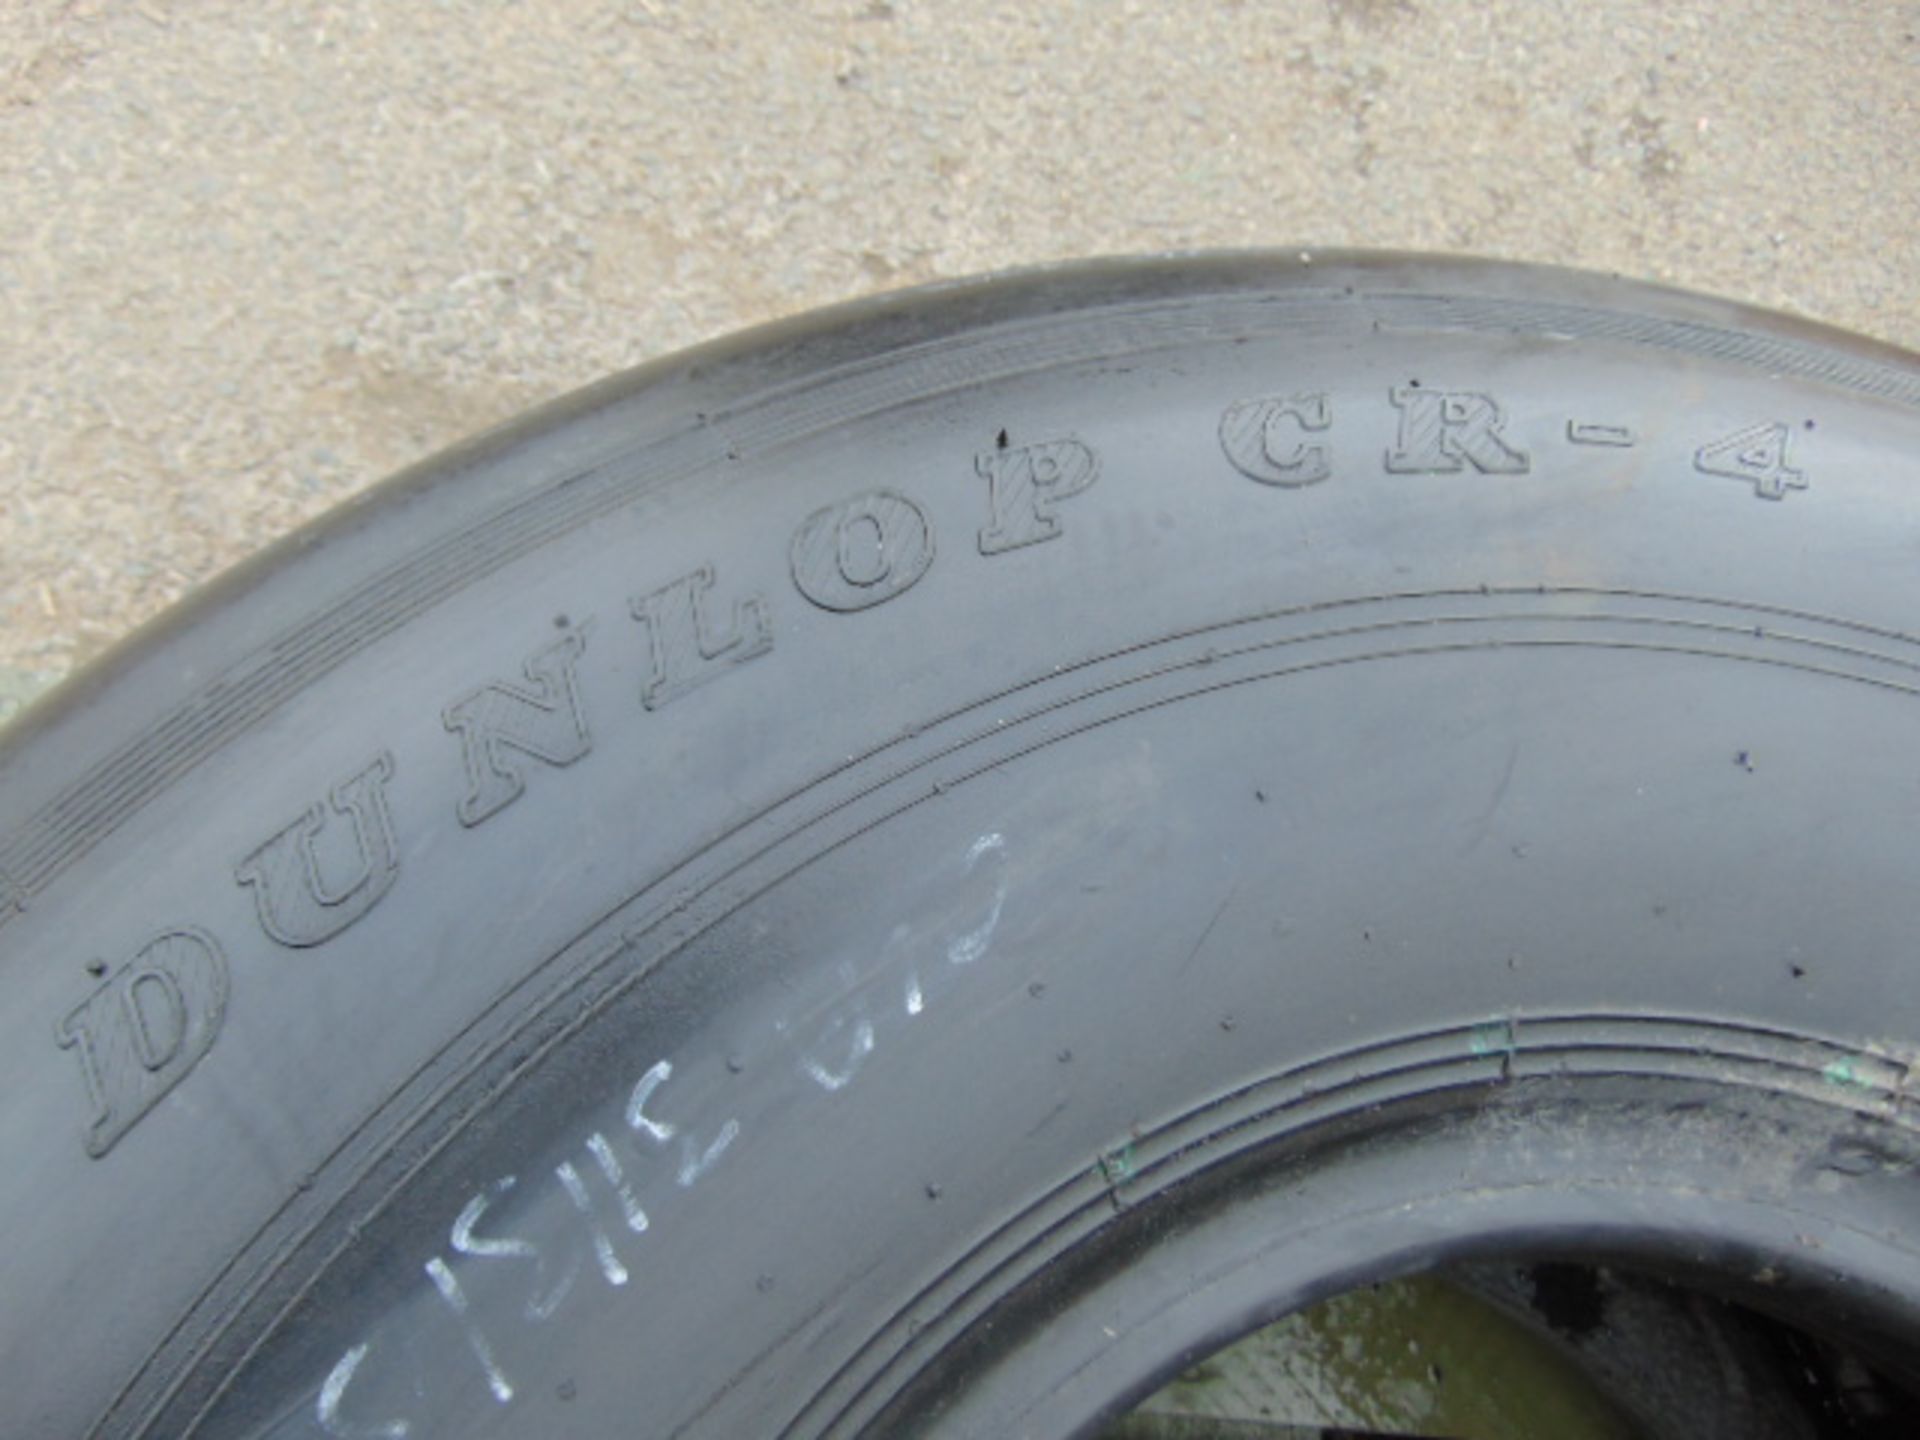 Dunlop CR-4 VC10 Aircraft Tyre - Image 3 of 5